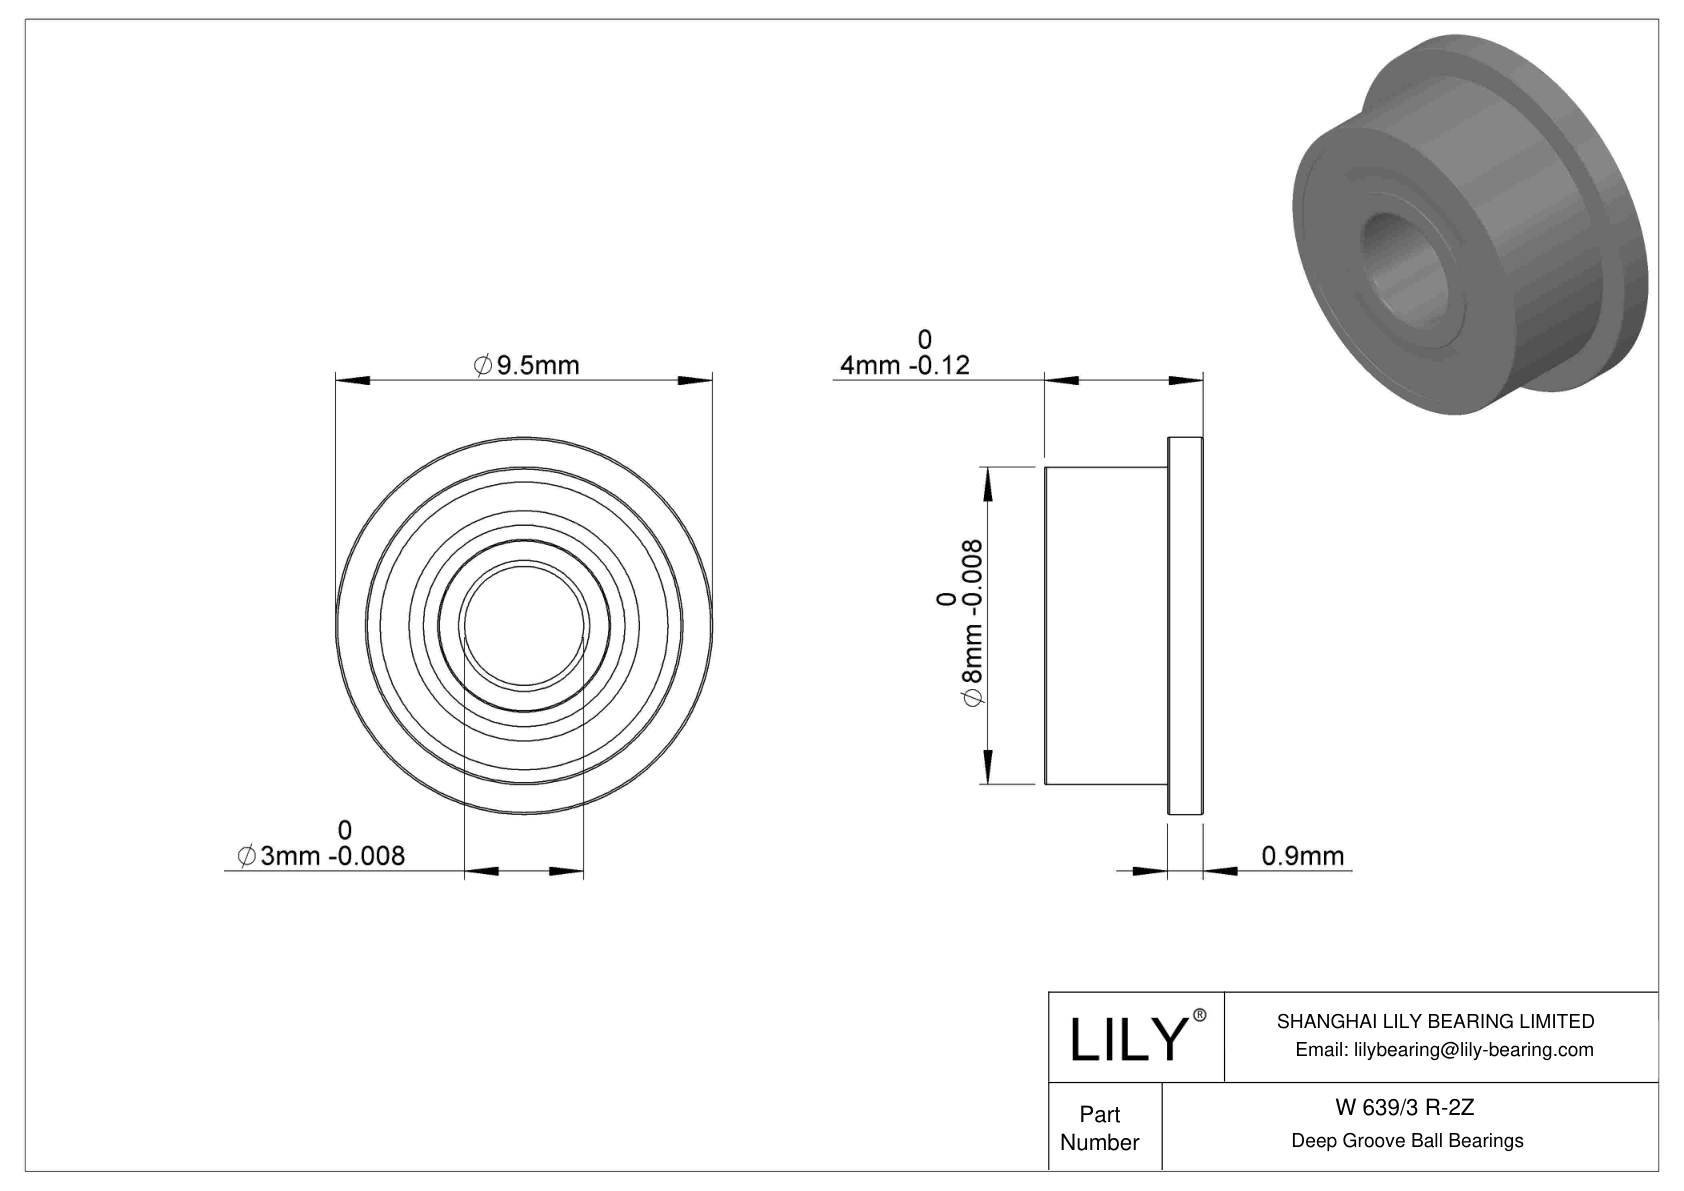 W 639/3 R-2Z Flanged Ball Bearings cad drawing